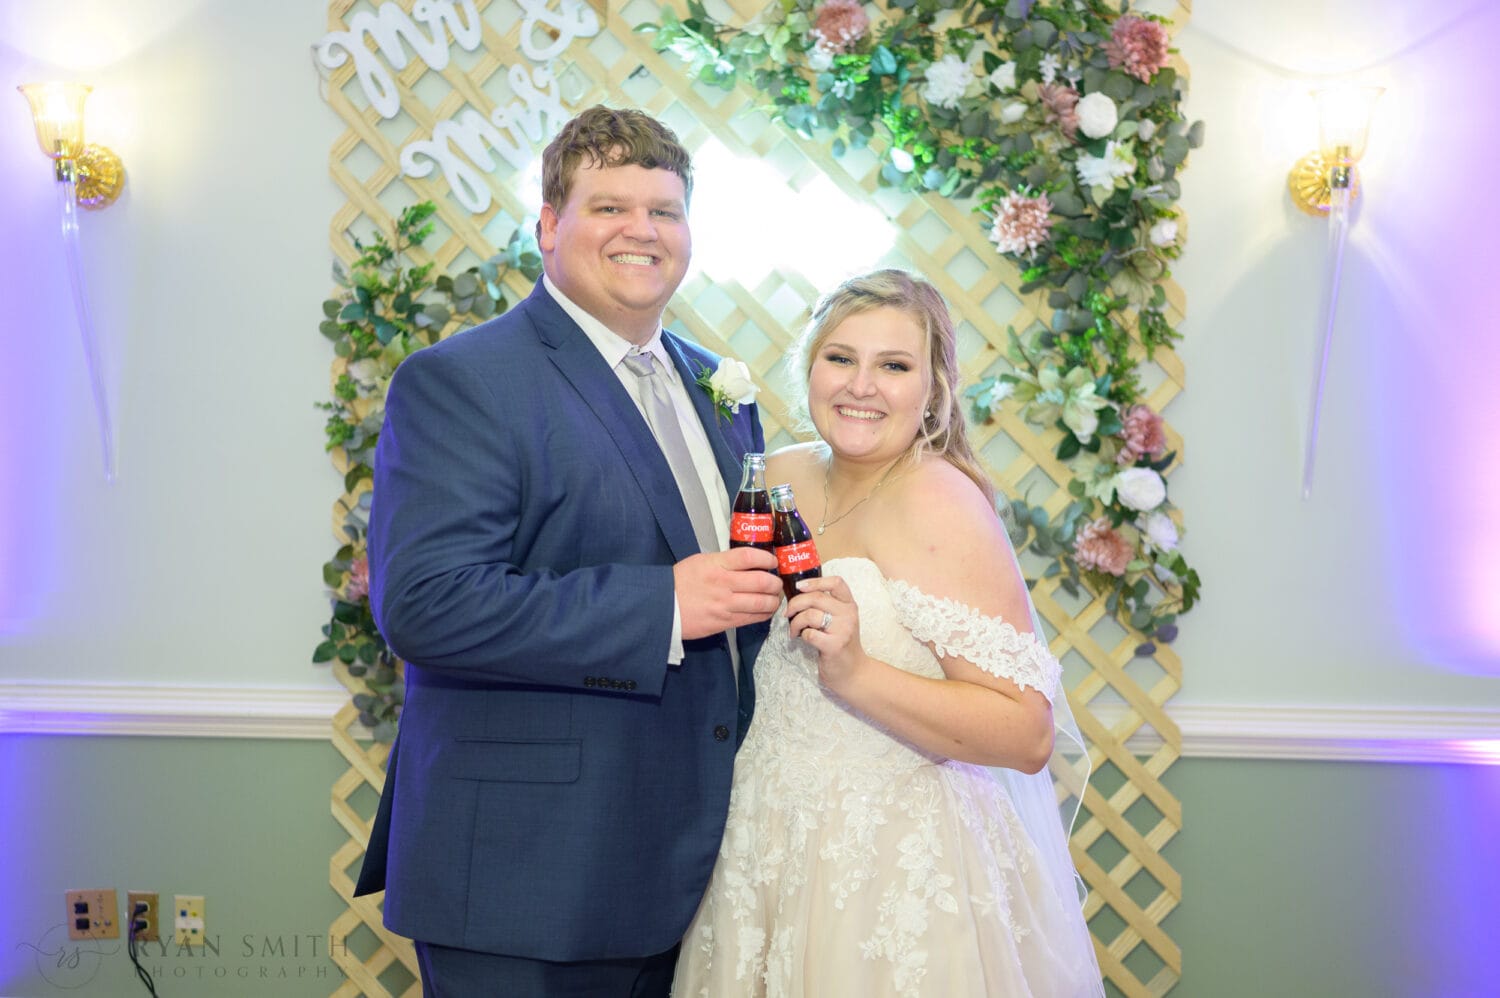 Toasts with the bride and groom coke bottles - Pawleys Plantation